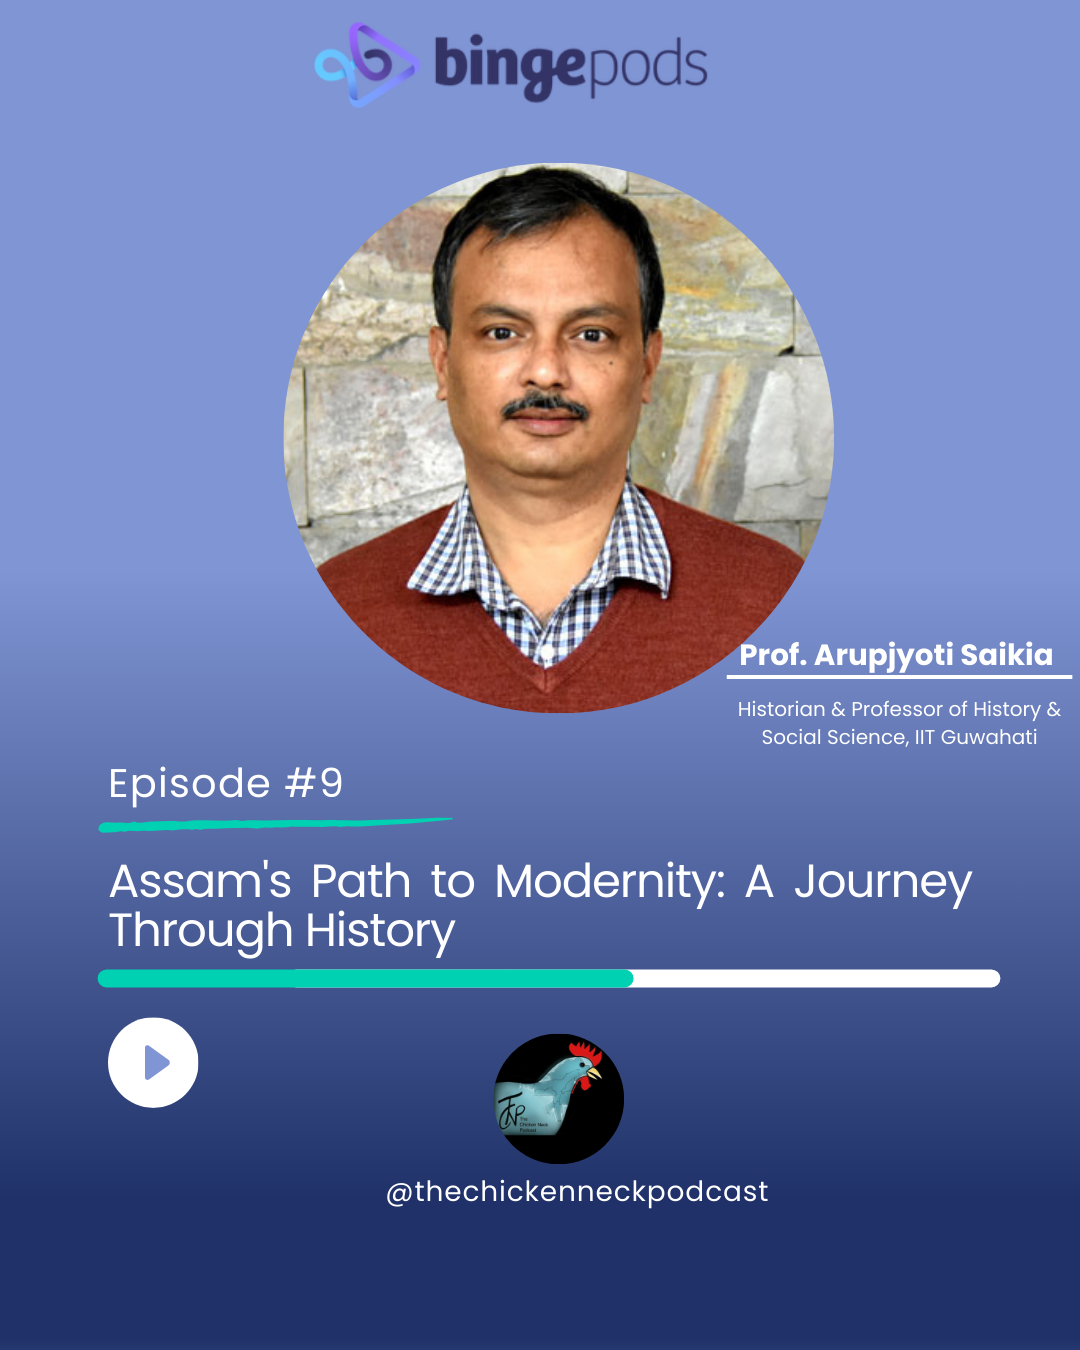 TCN - Assam's Quest to Modernity: A Journey Through History -  Dr. Arupjyoti Saikia